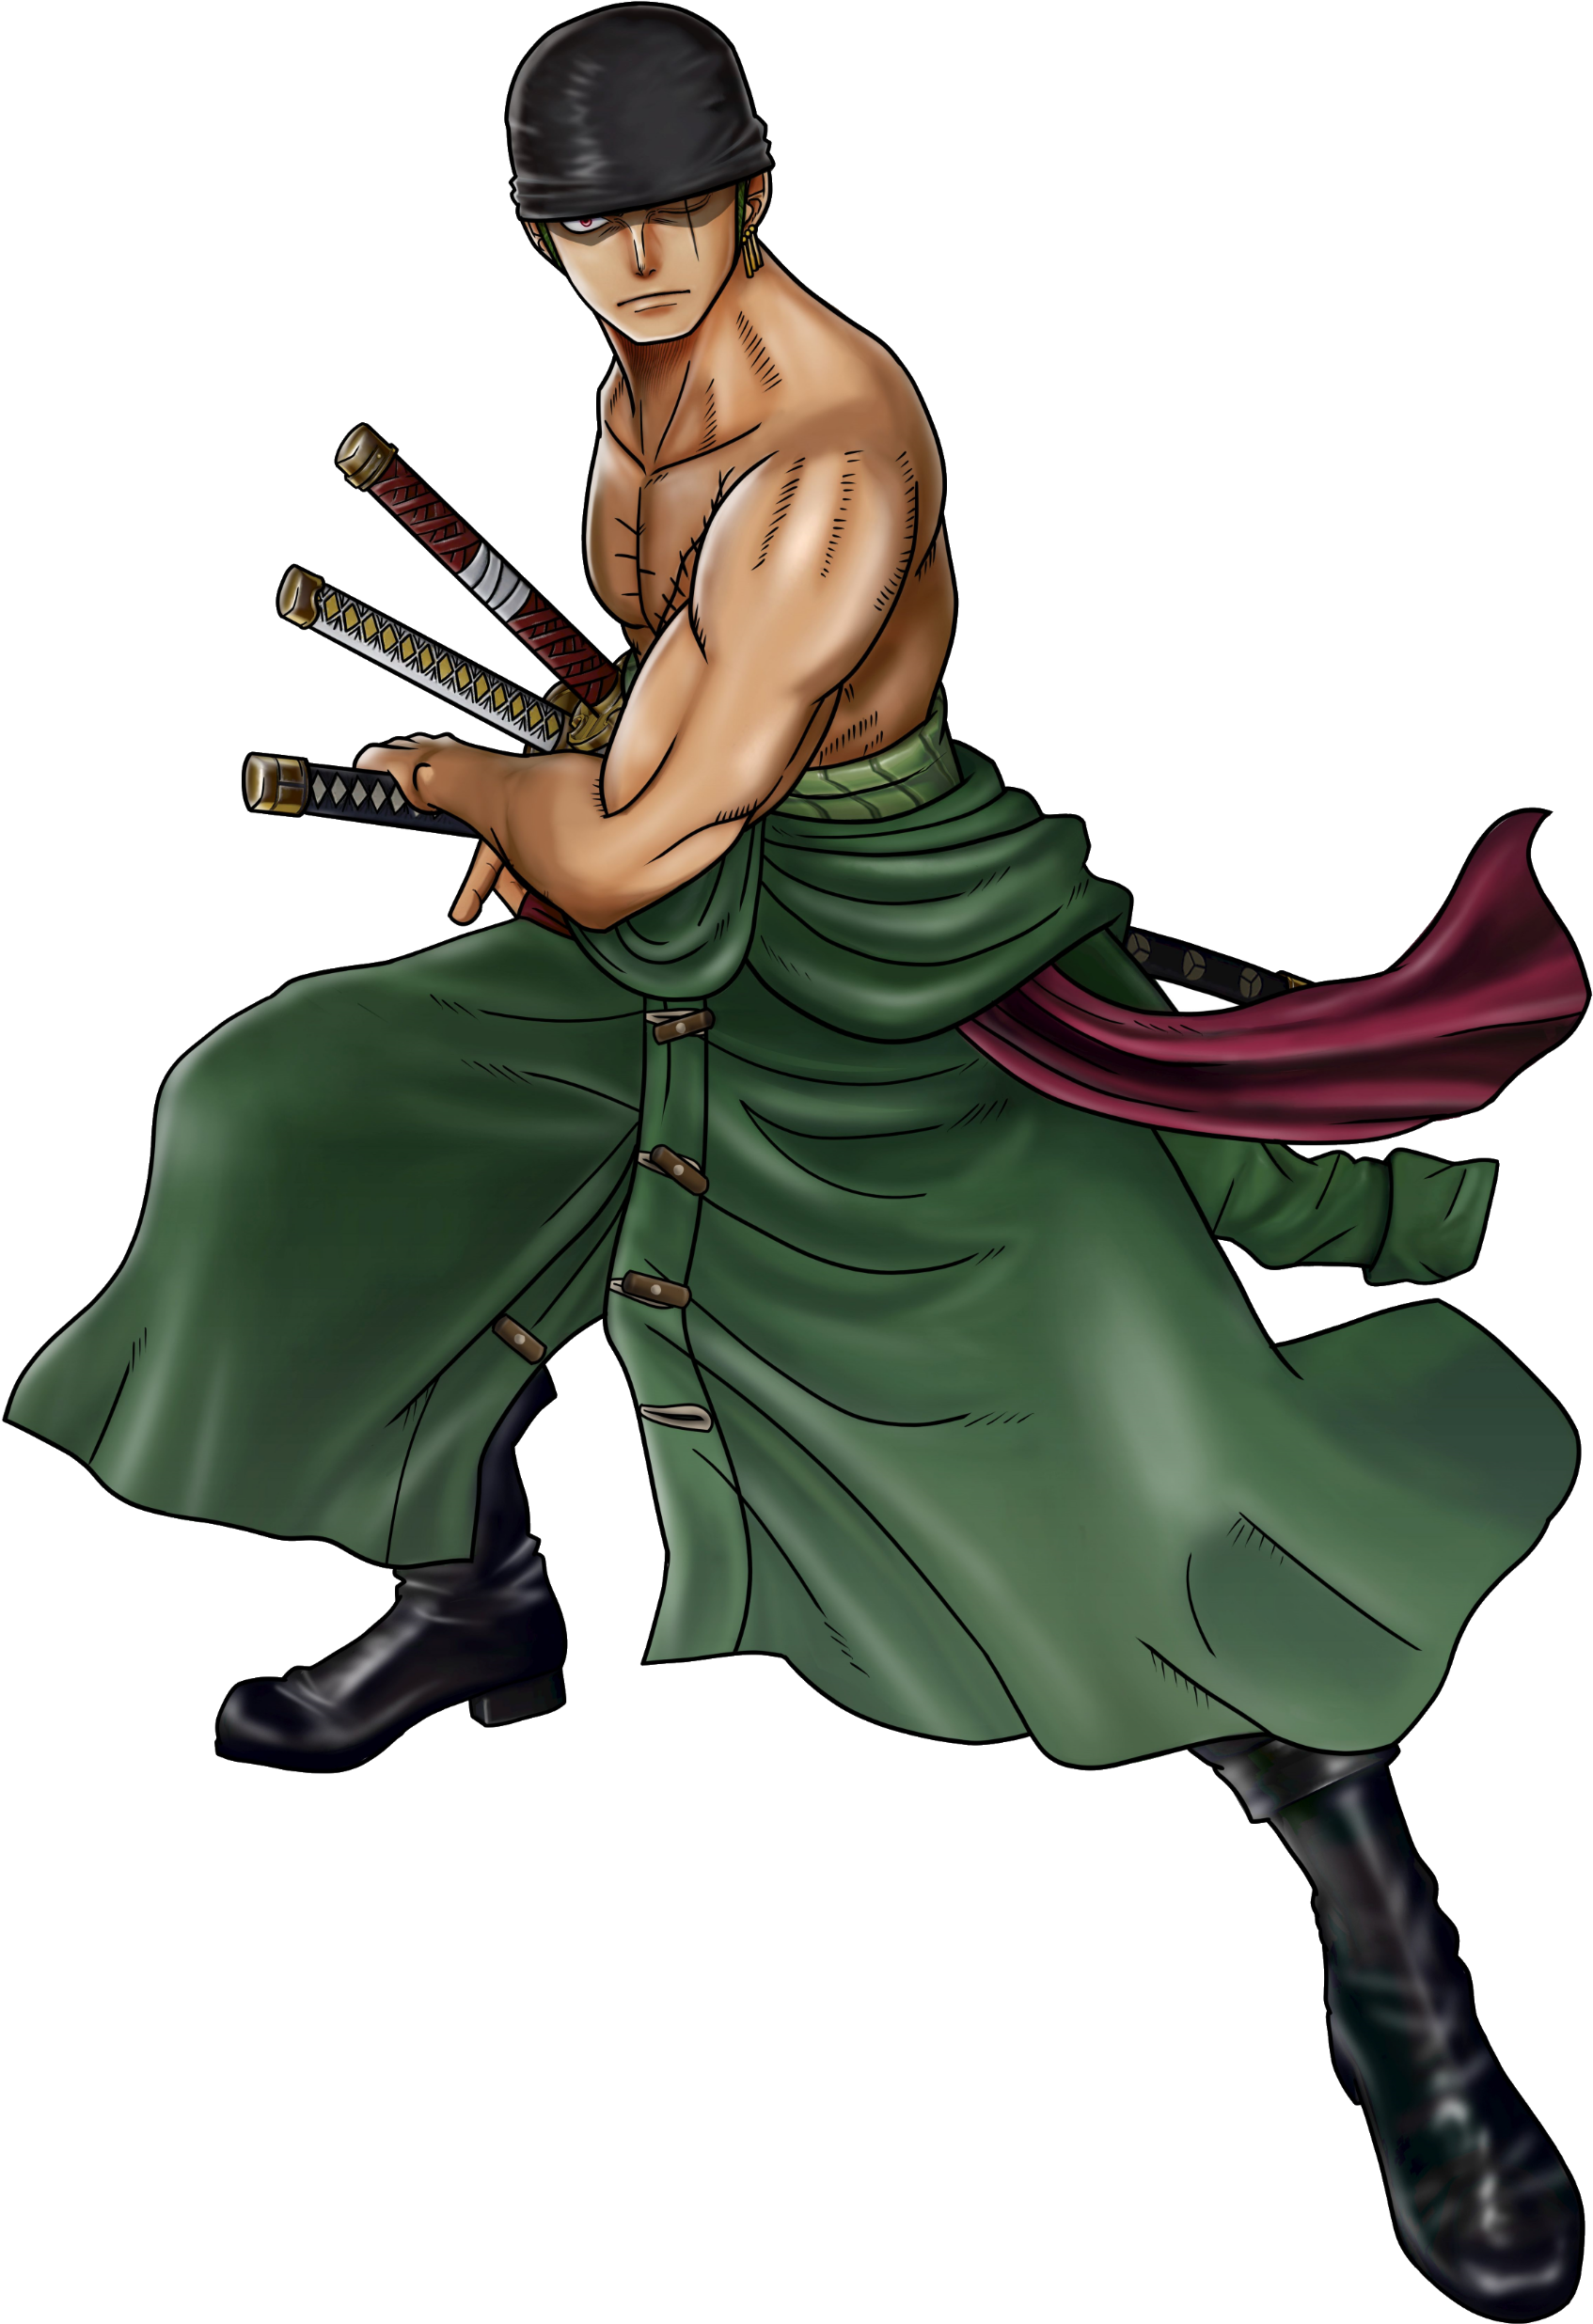 Download Zoro Render PNG Image with No Backgroud - PNGkey.com.